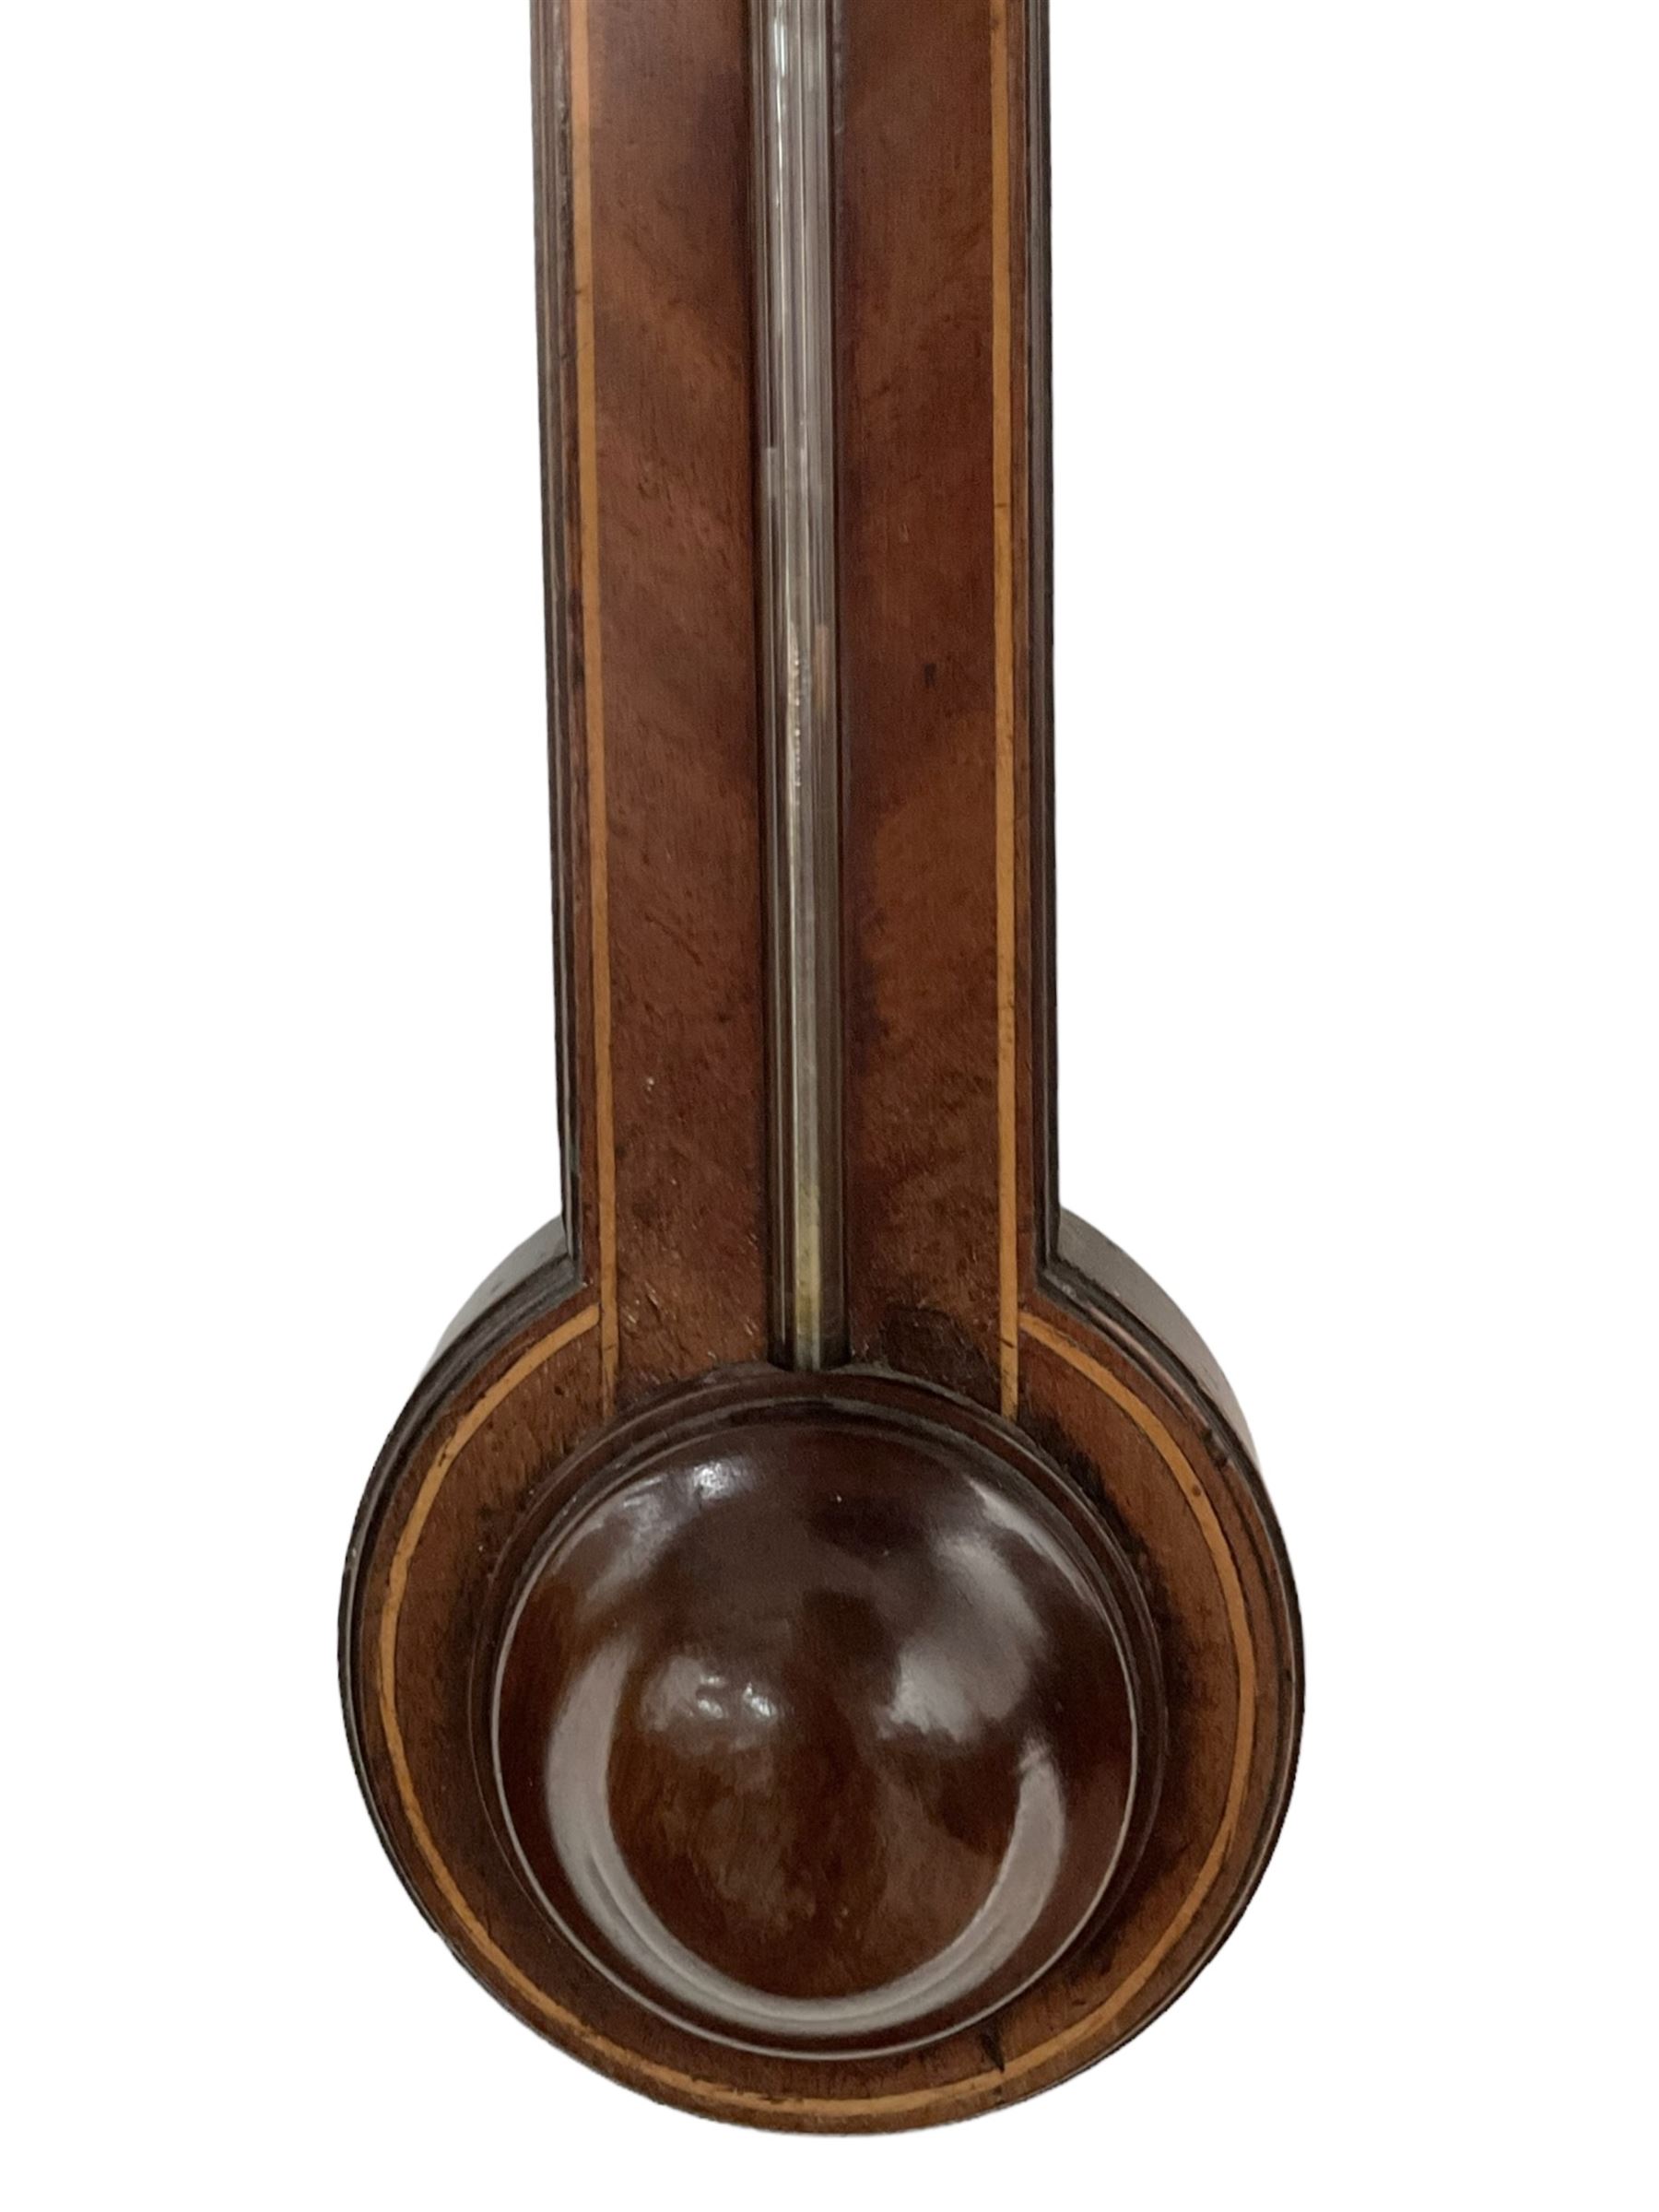 18th century - Stick barometer with a broken pediment and brass register inscribed Robert Fyter - Image 2 of 3